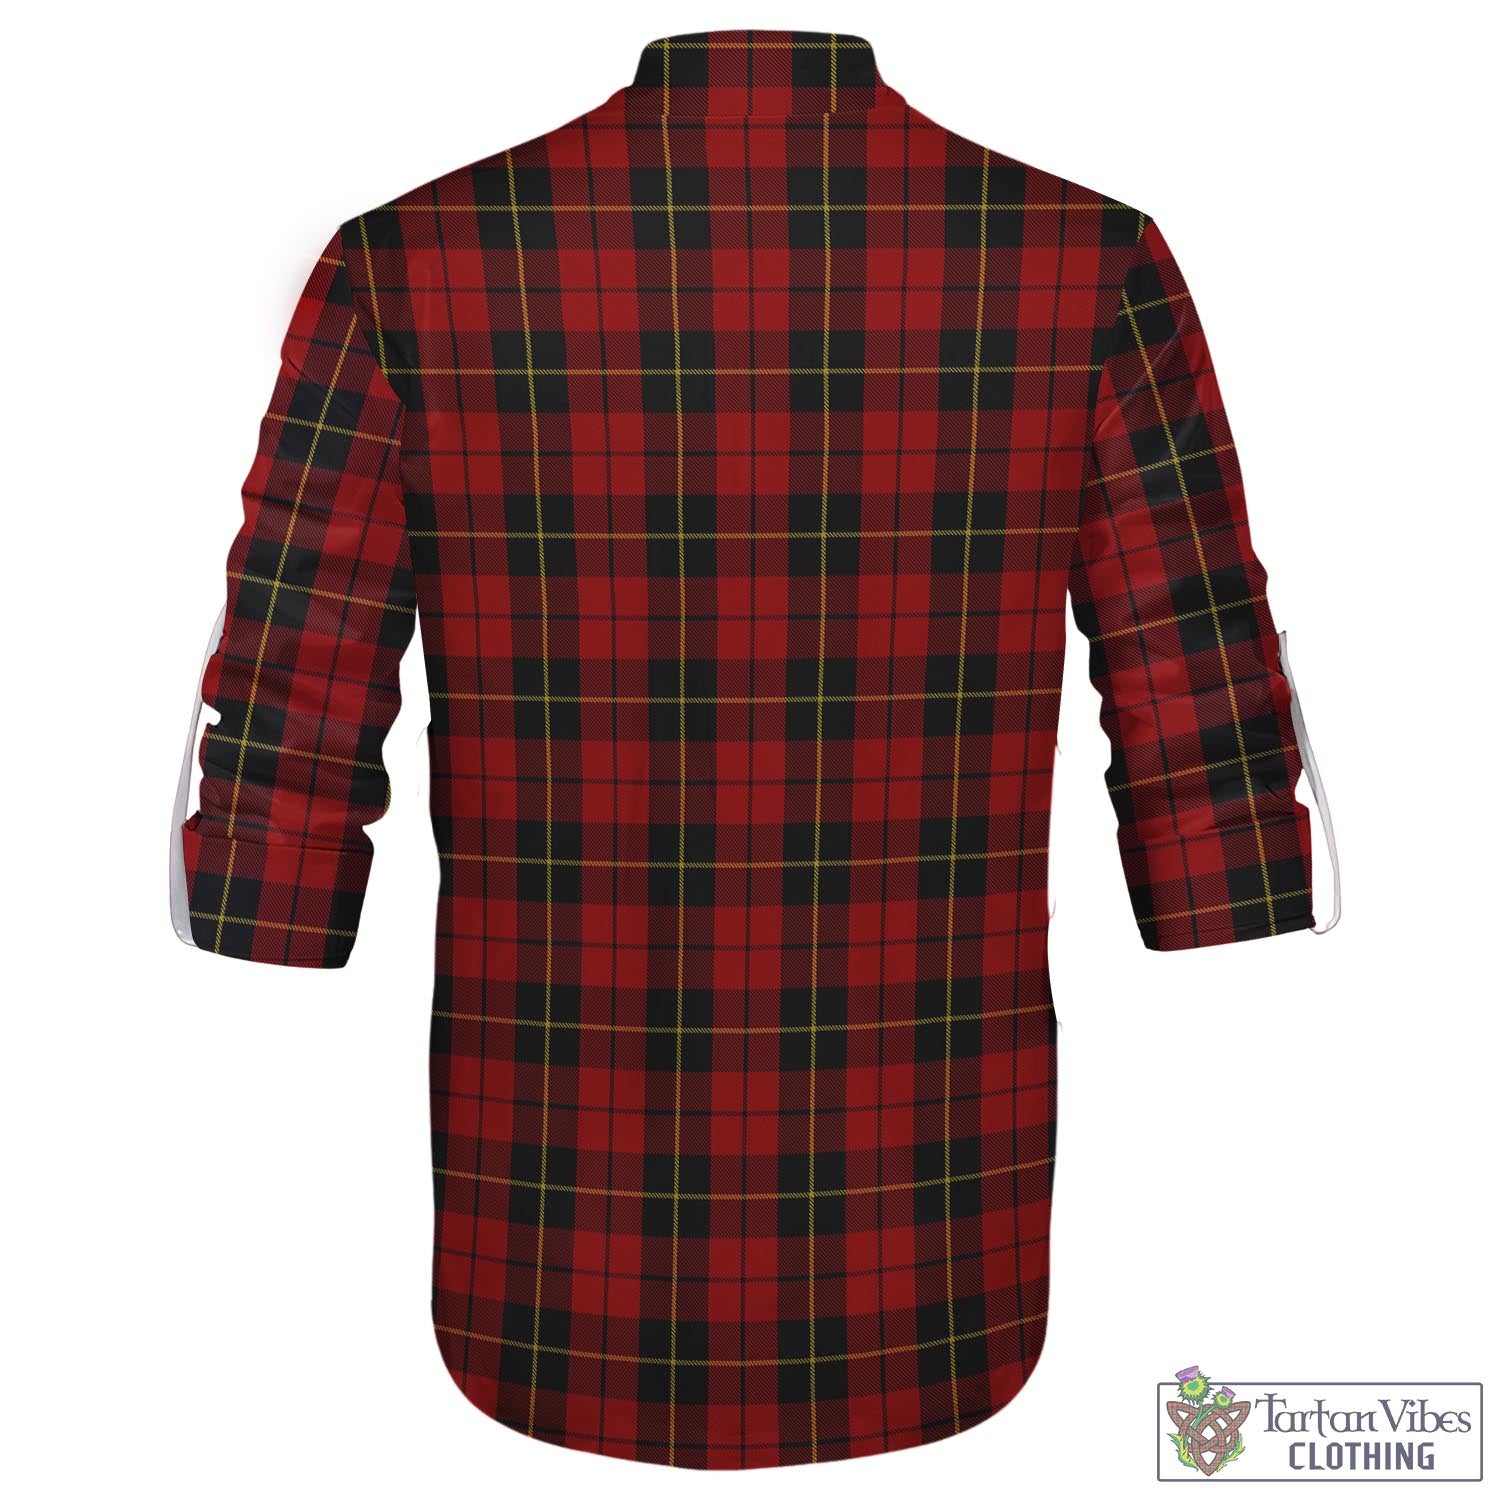 Tartan Vibes Clothing Wallace Tartan Men's Scottish Traditional Jacobite Ghillie Kilt Shirt with Family Crest